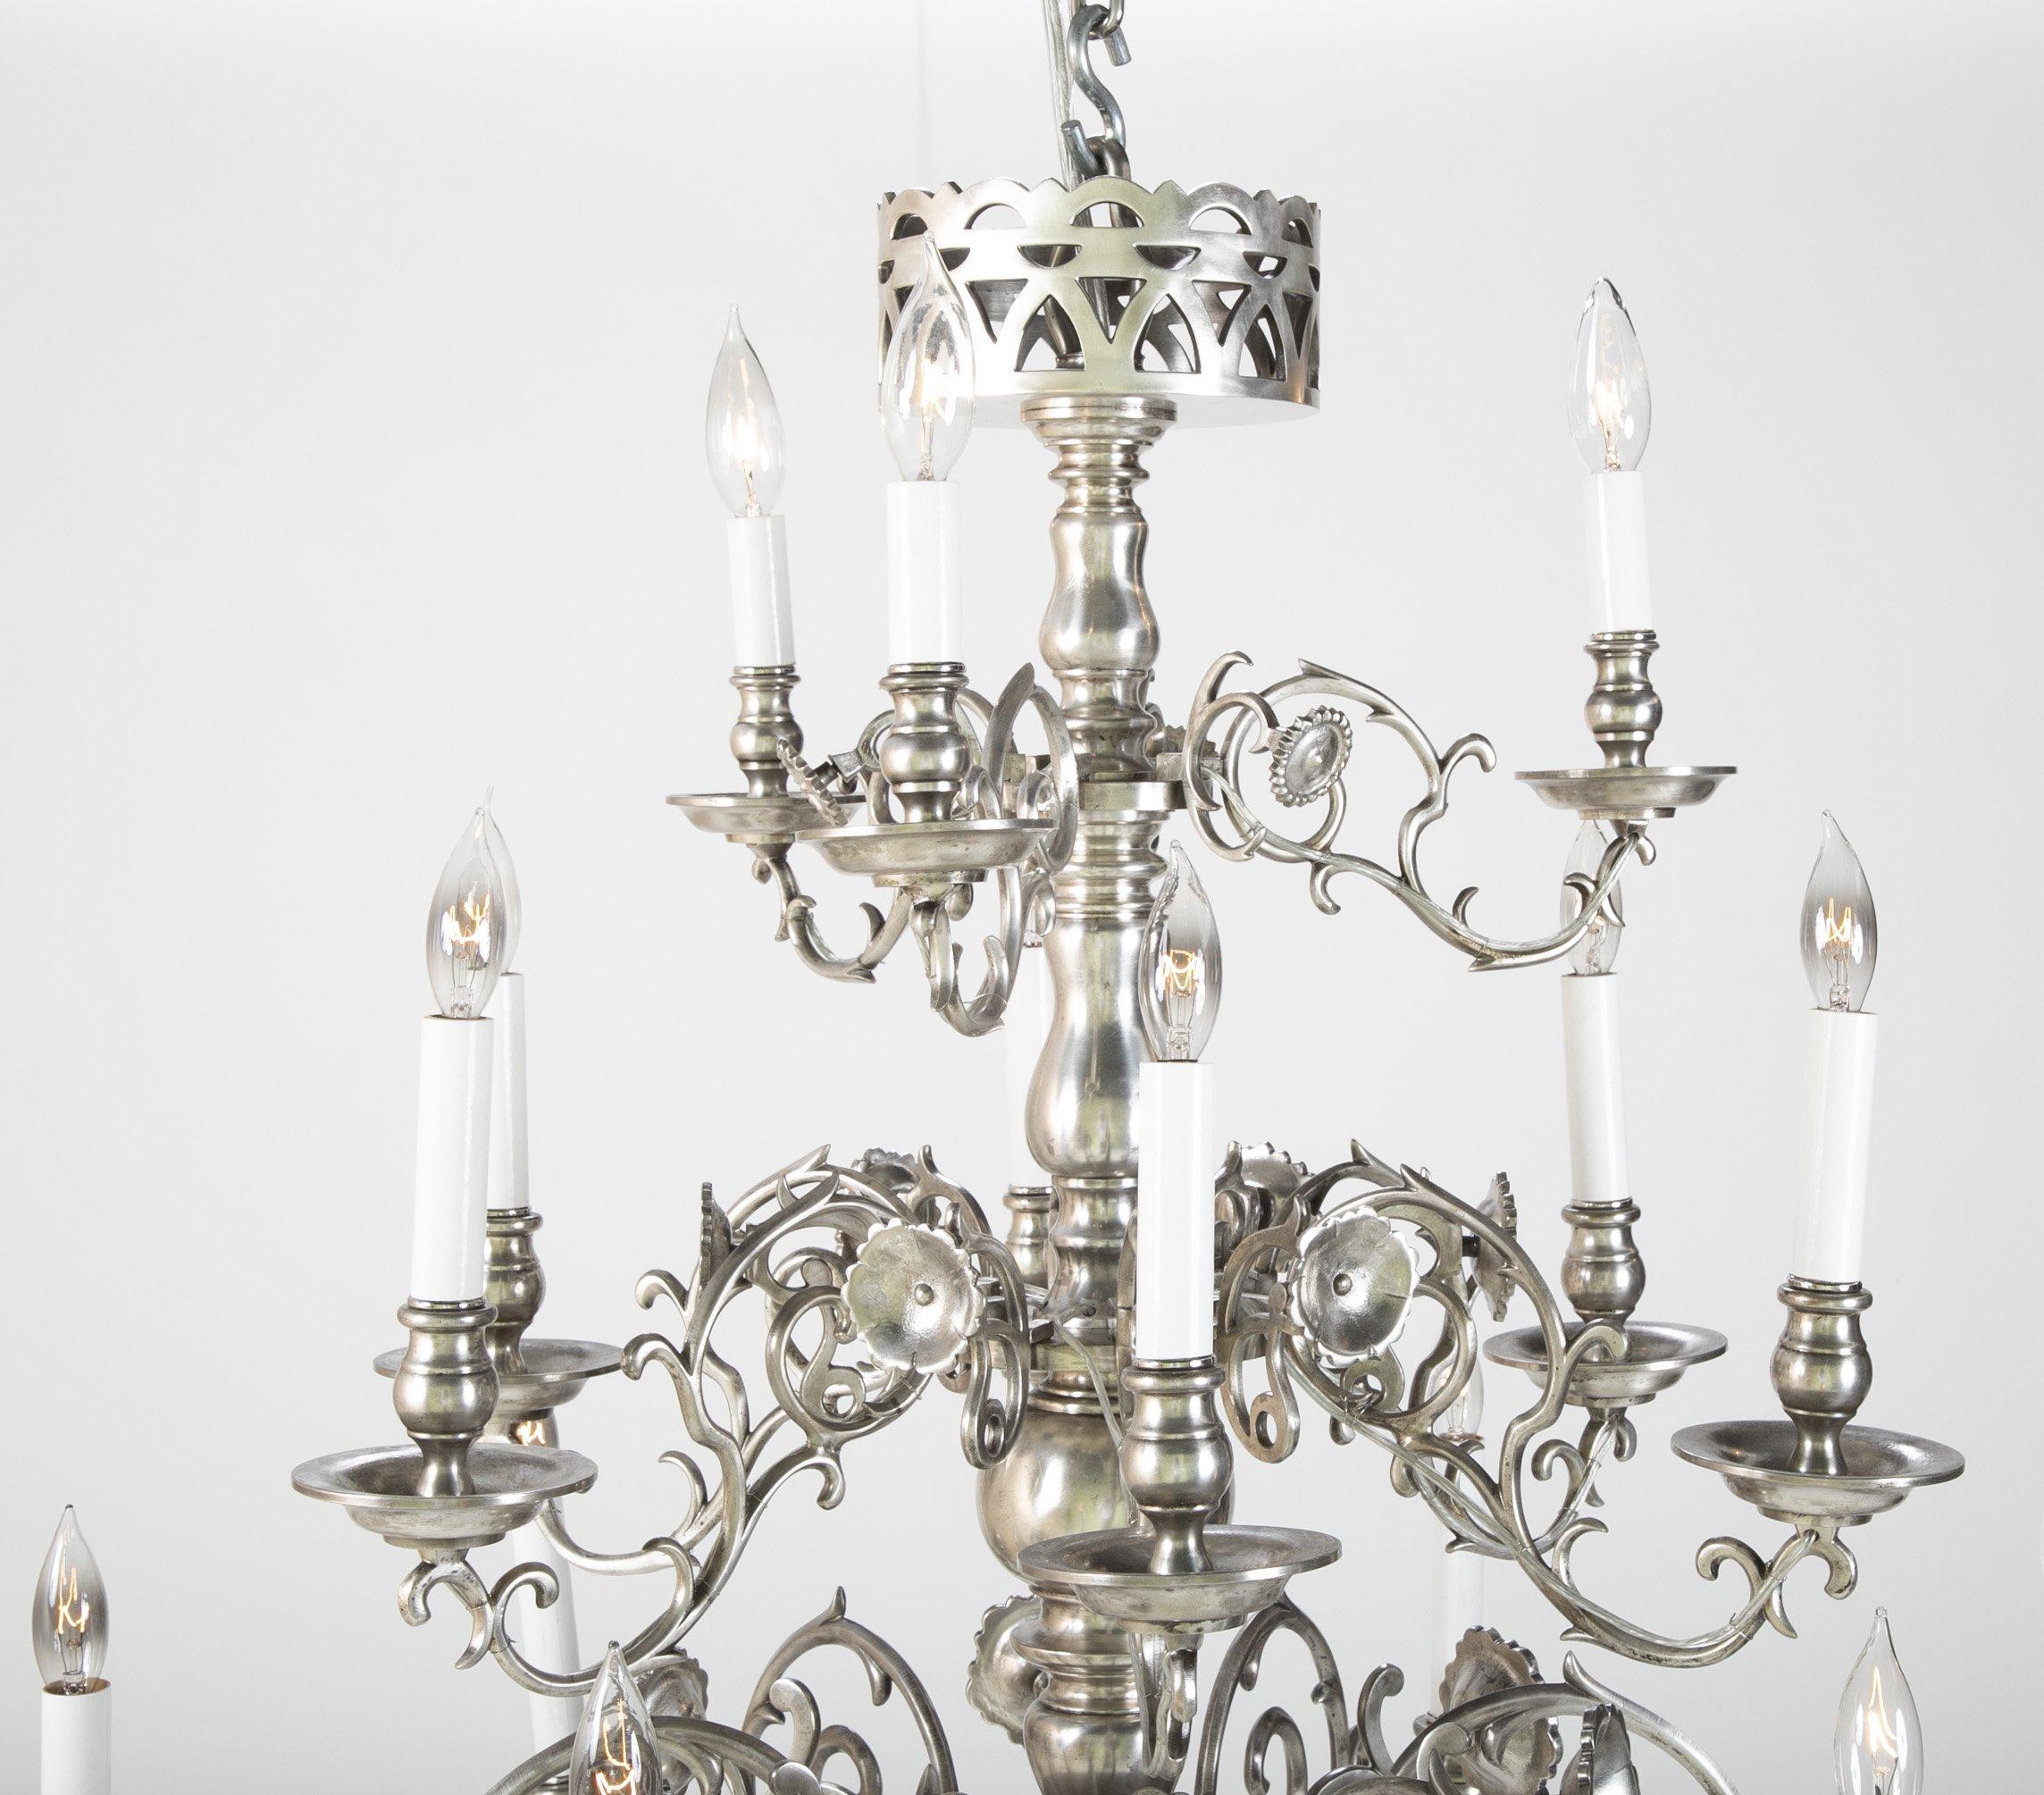 A 19th century polished iron 14 light three-tier chandelier.